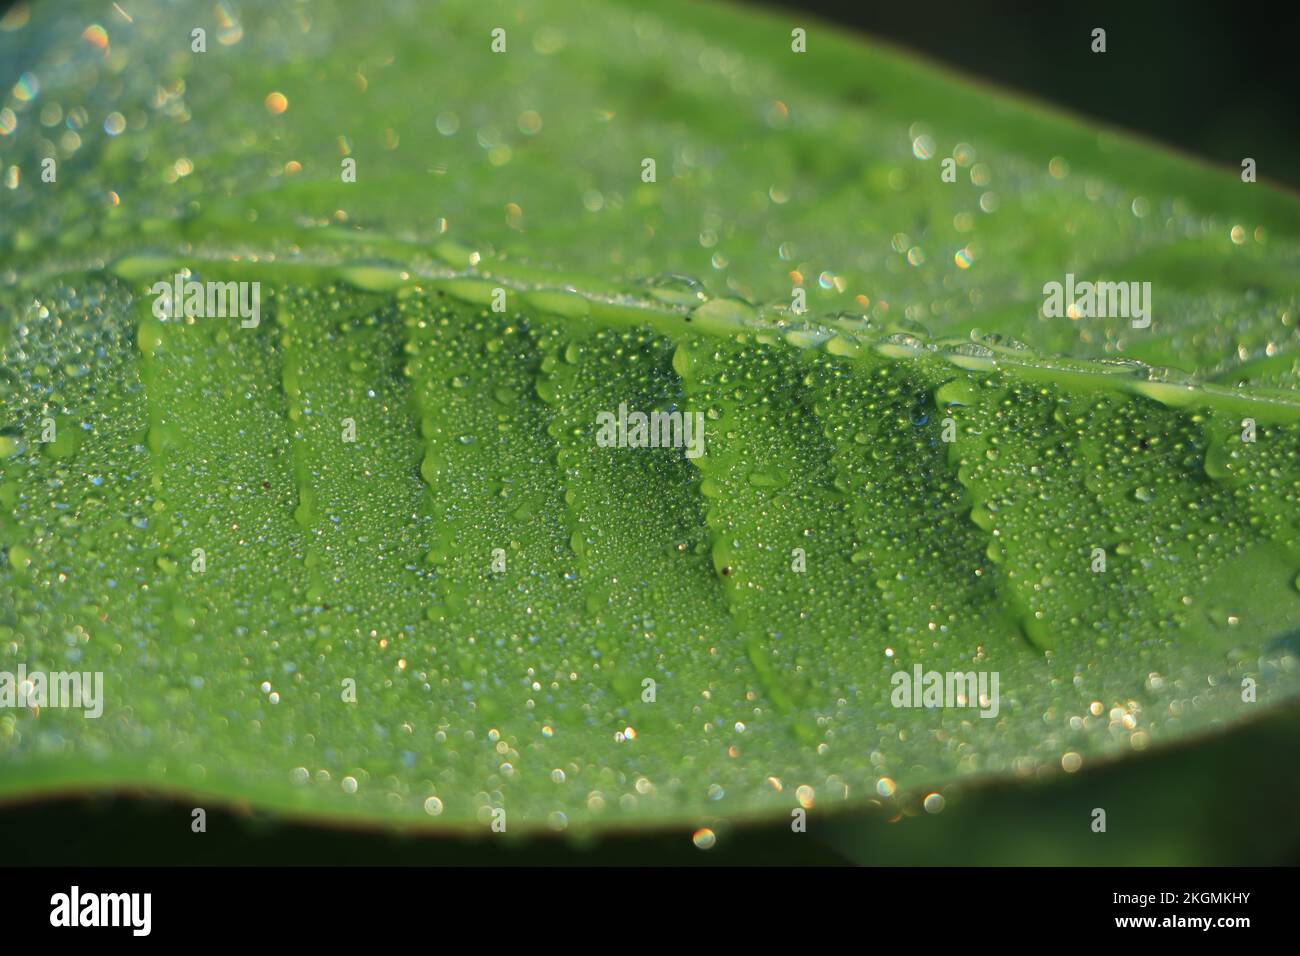 Banana leaf with water droplets Stock Photo